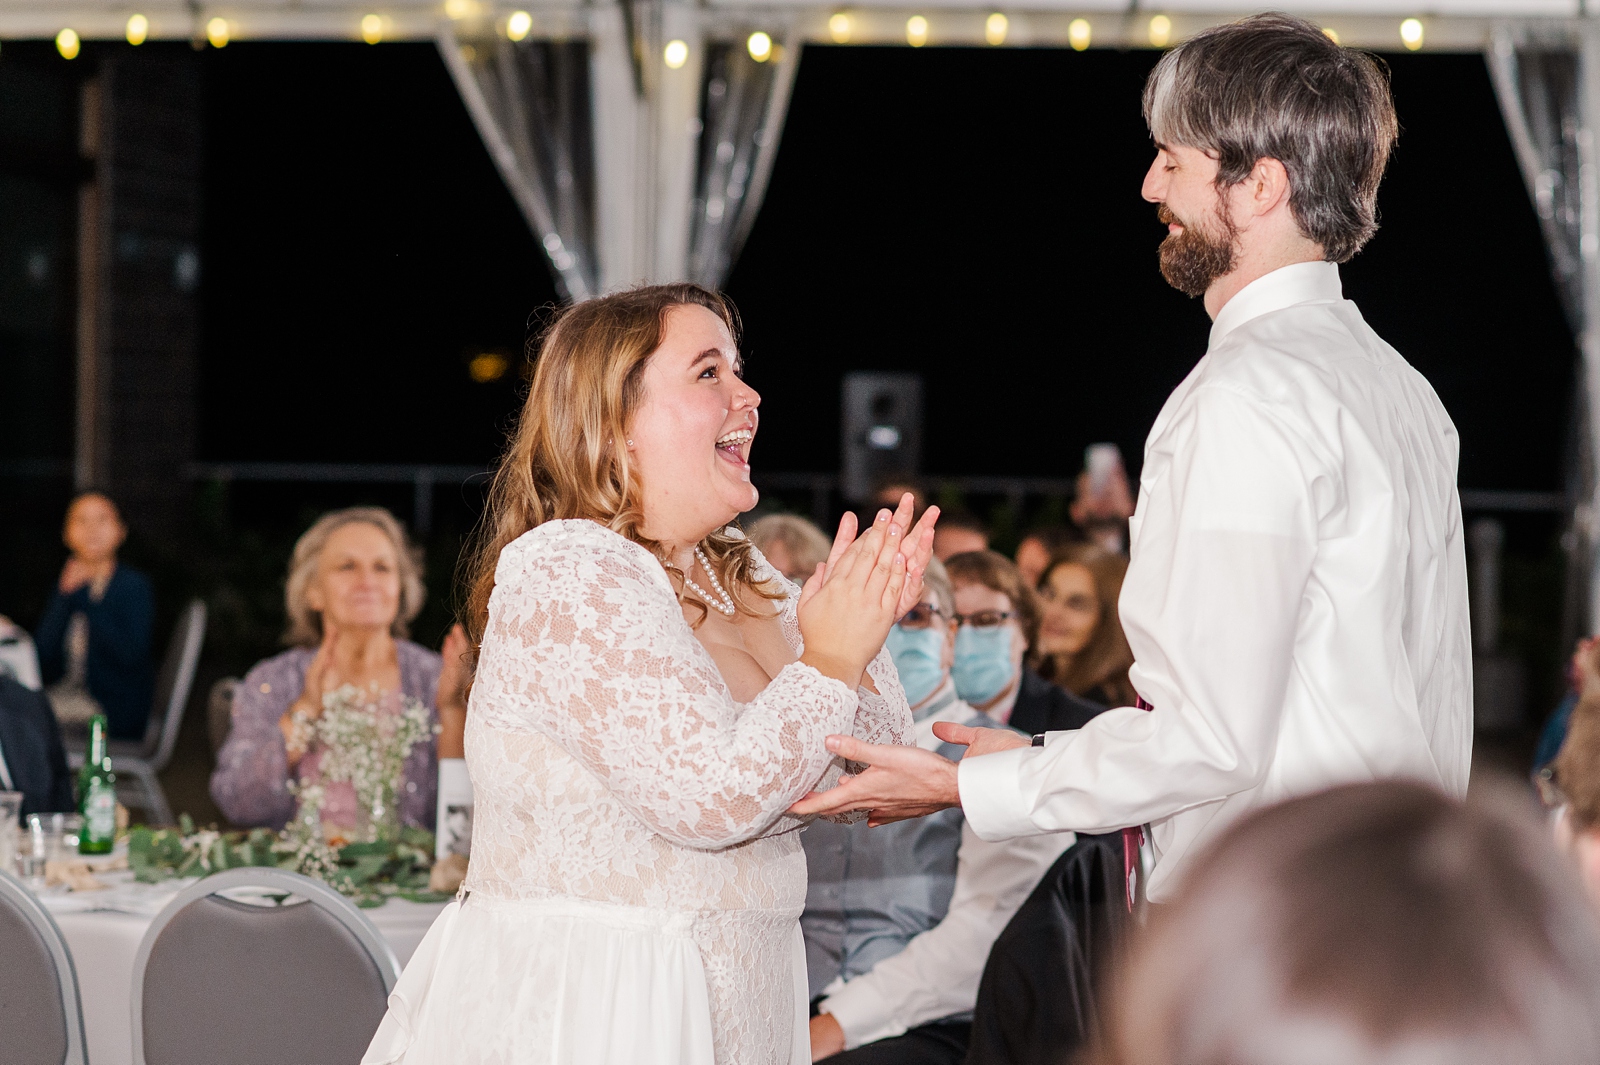 First Dance at Maymont Wedding Reception. Photography by Richmond Wedding Photographer Kailey Brianne Photography.